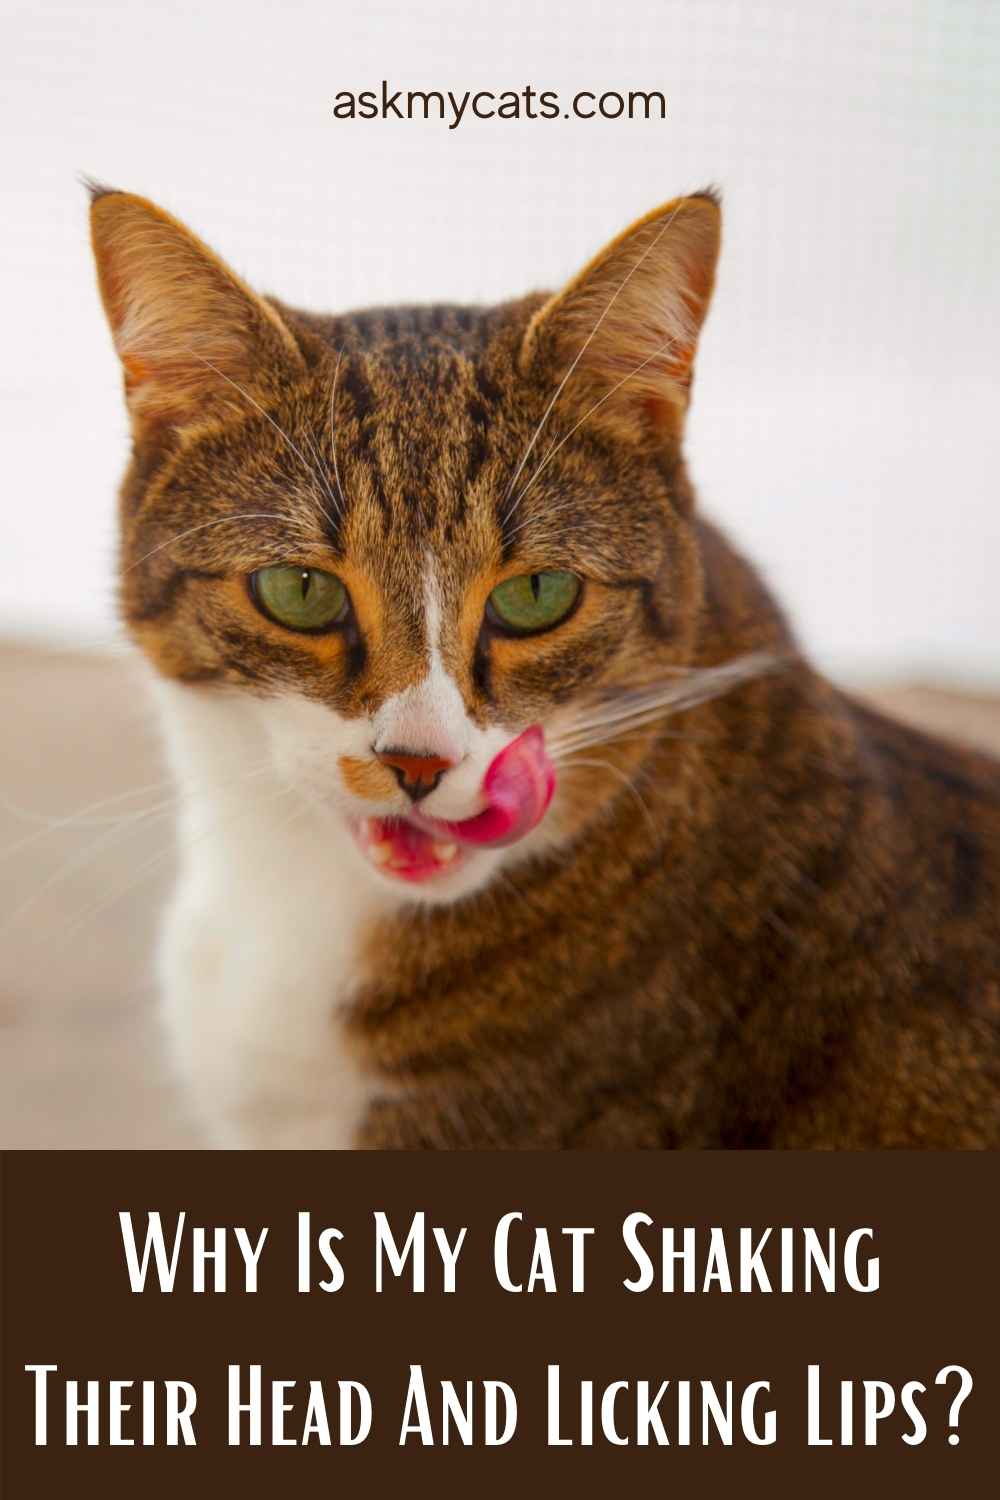 Cat Keeps Licking Lips And Shaking Head? Are They Going Insane?